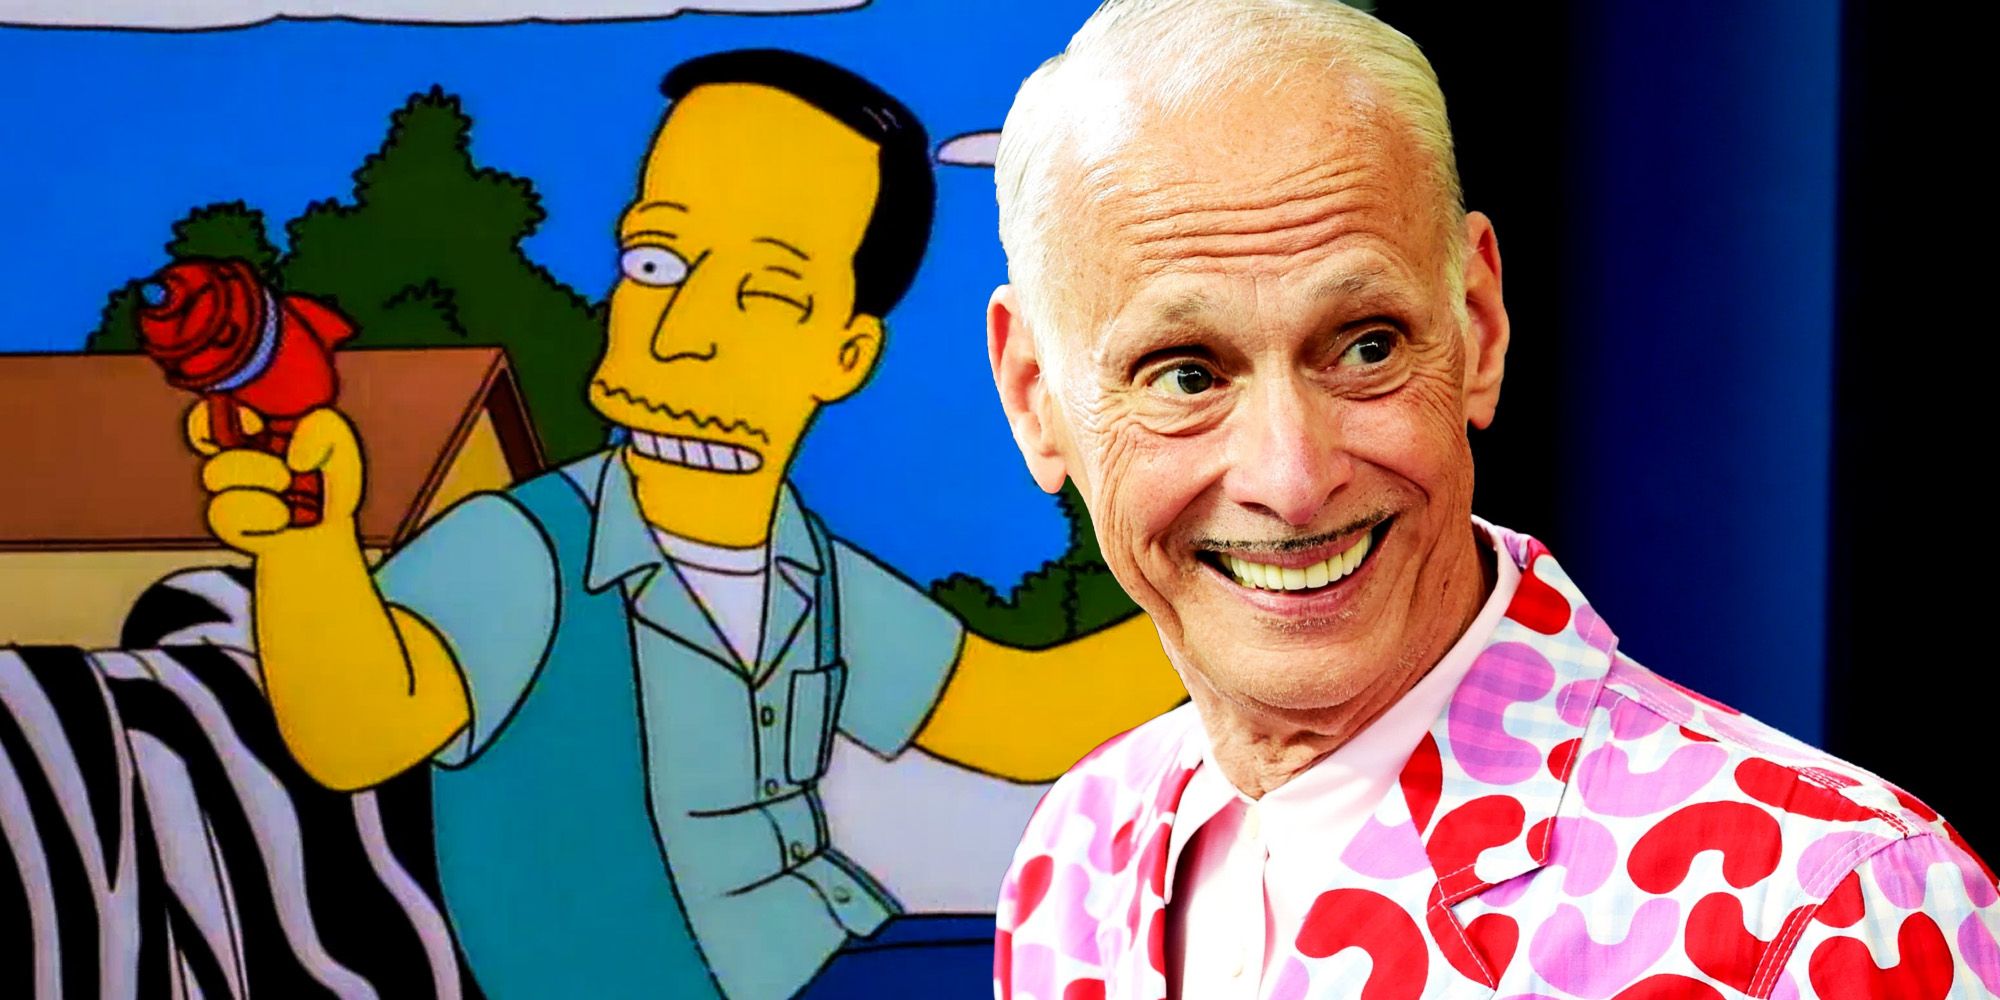 John Waters shaped the simpsons groundbreaking LGBTQ episode Homers phobia